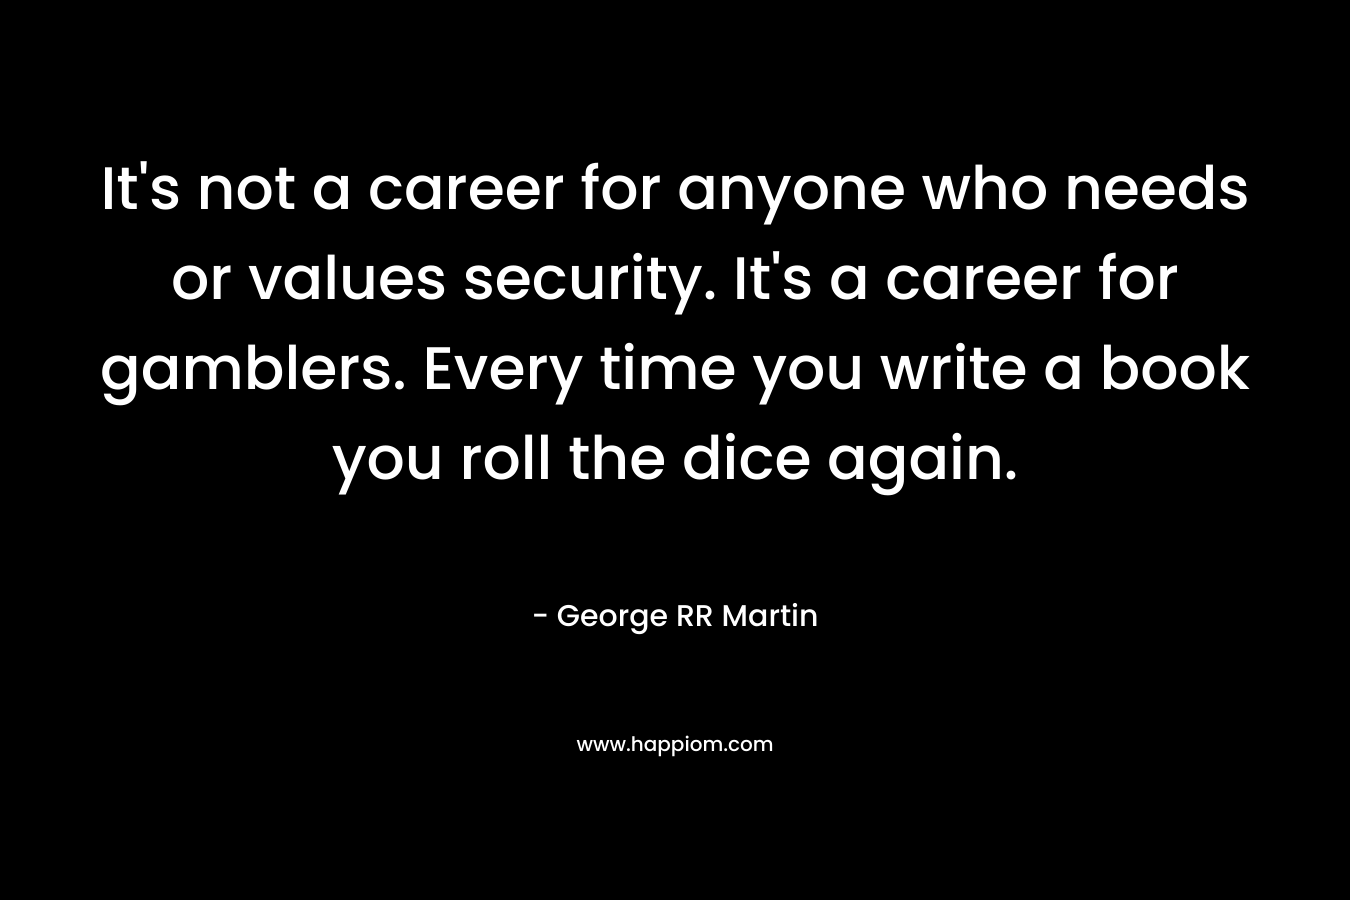 It's not a career for anyone who needs or values security. It's a career for gamblers. Every time you write a book you roll the dice again.